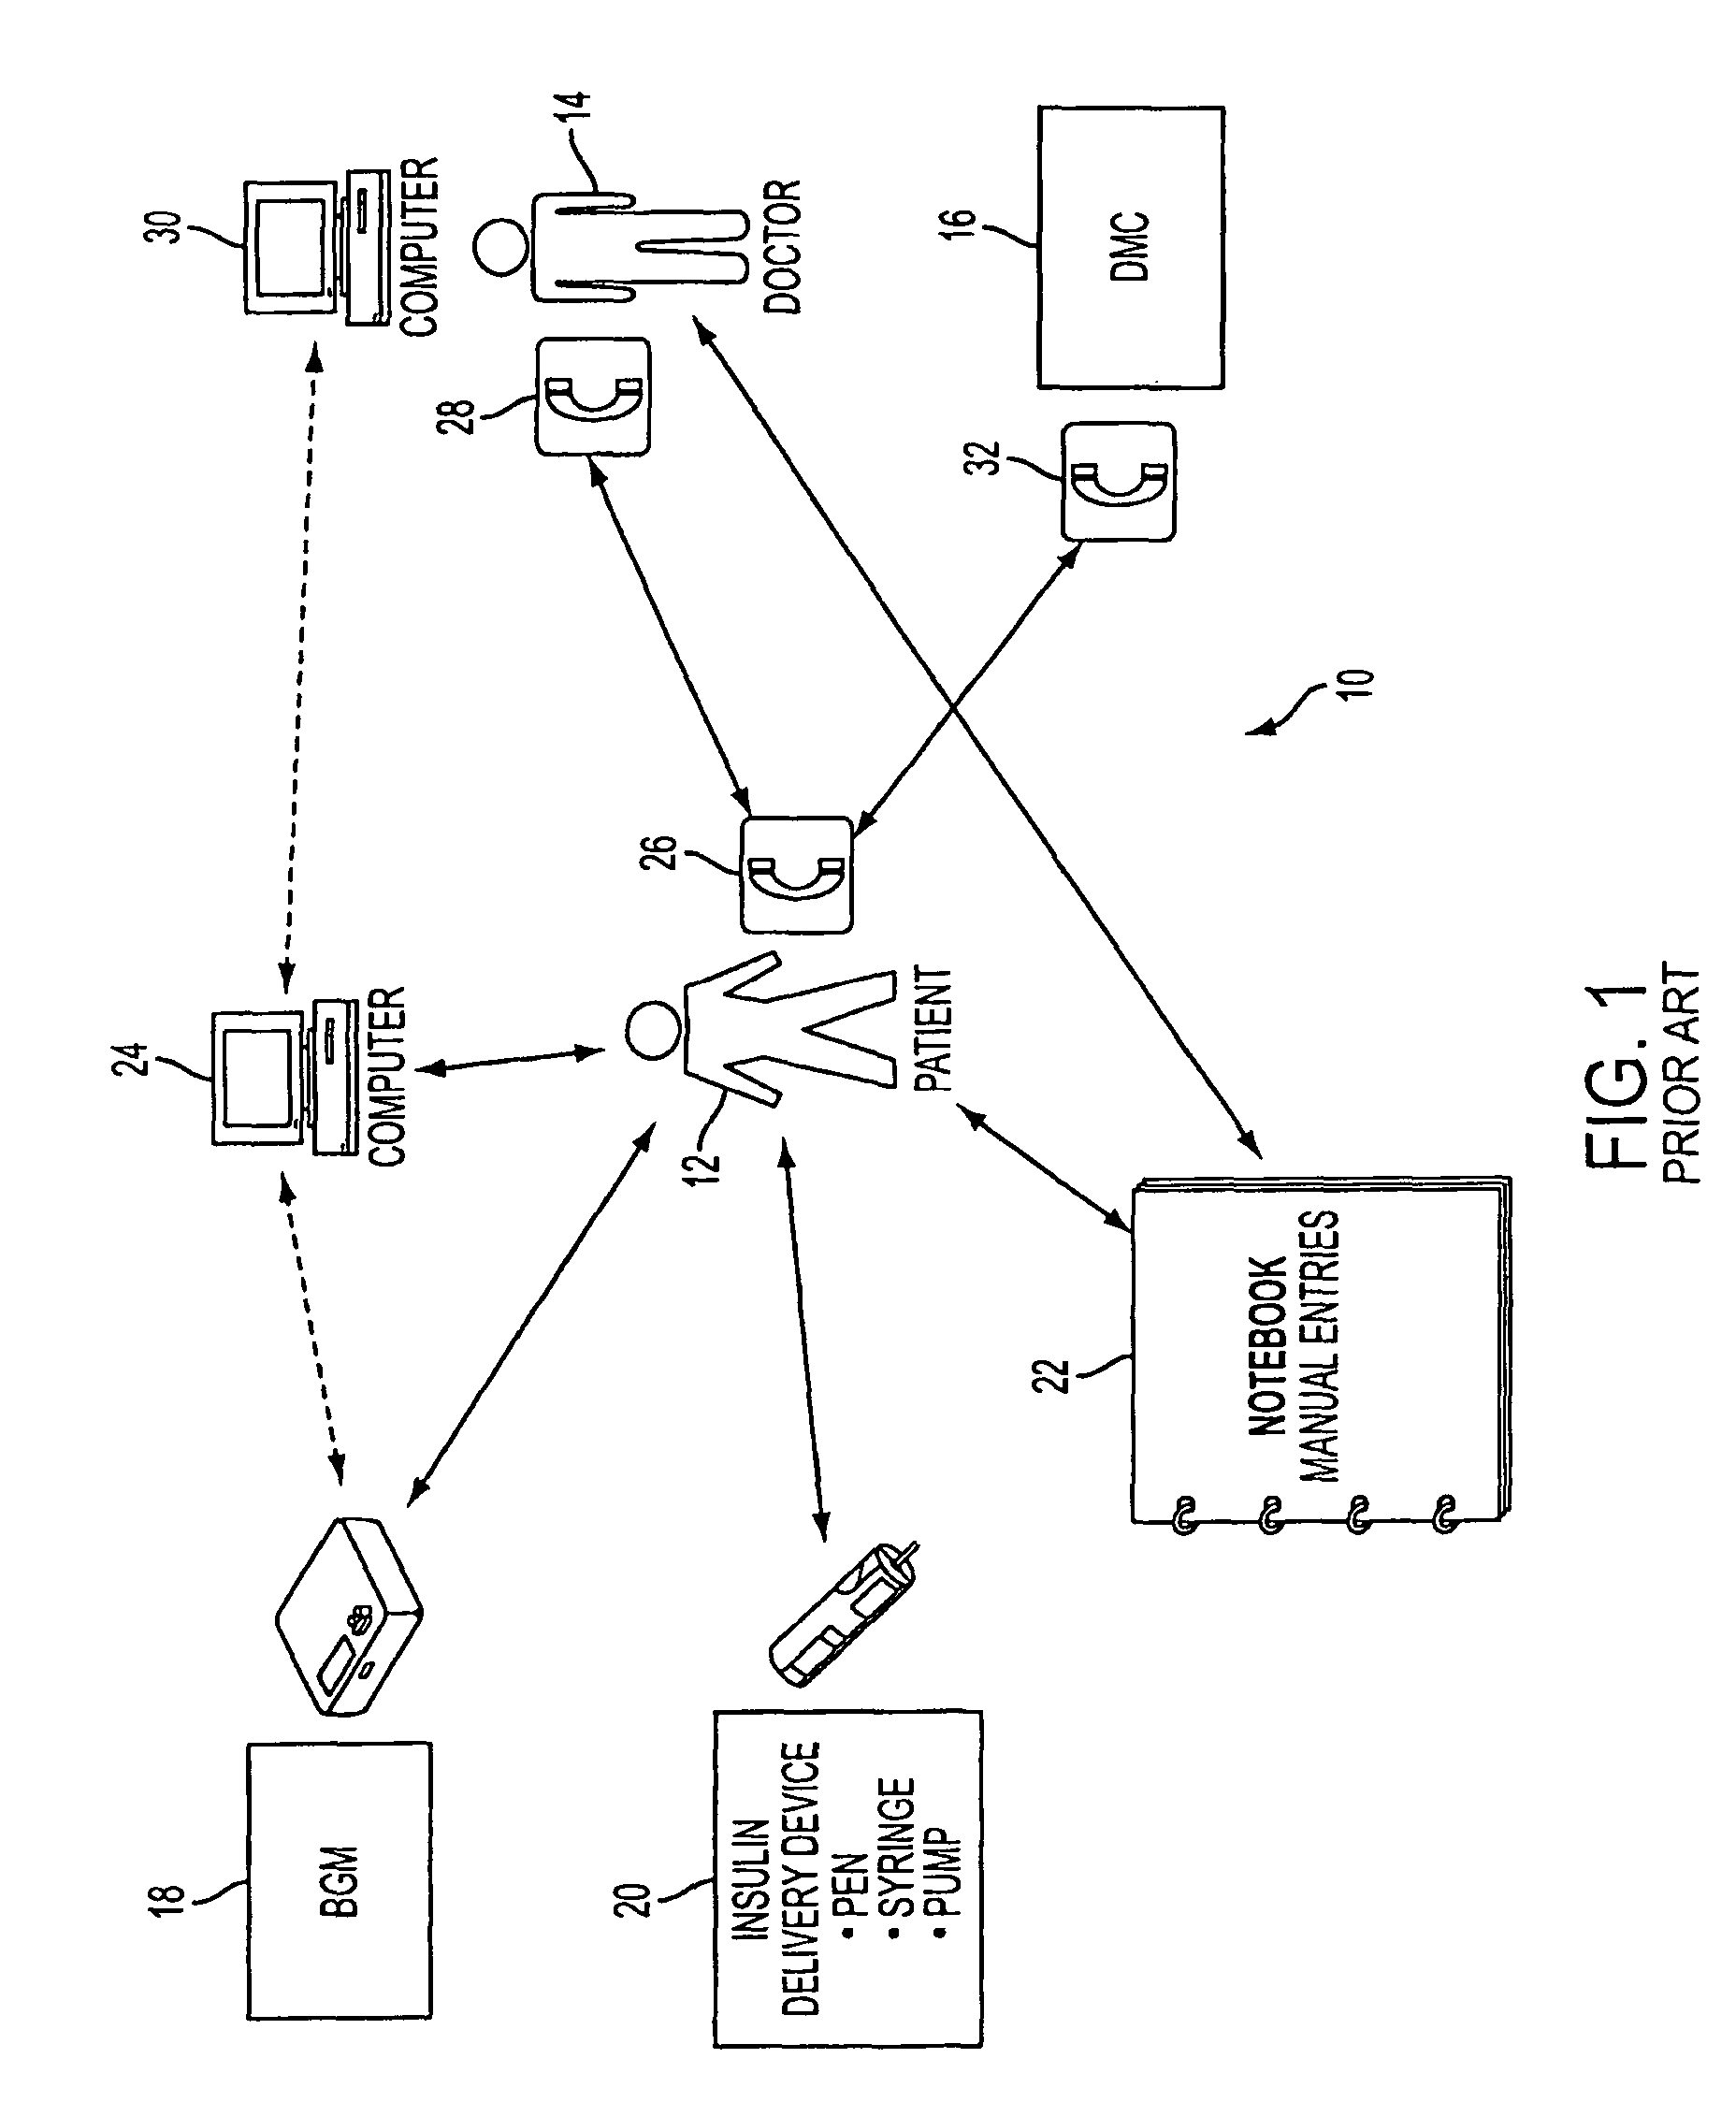 System and methods for improved diabetes data management and use employing wireless connectivity between patients and healthcare providers and repository of diabetes management information